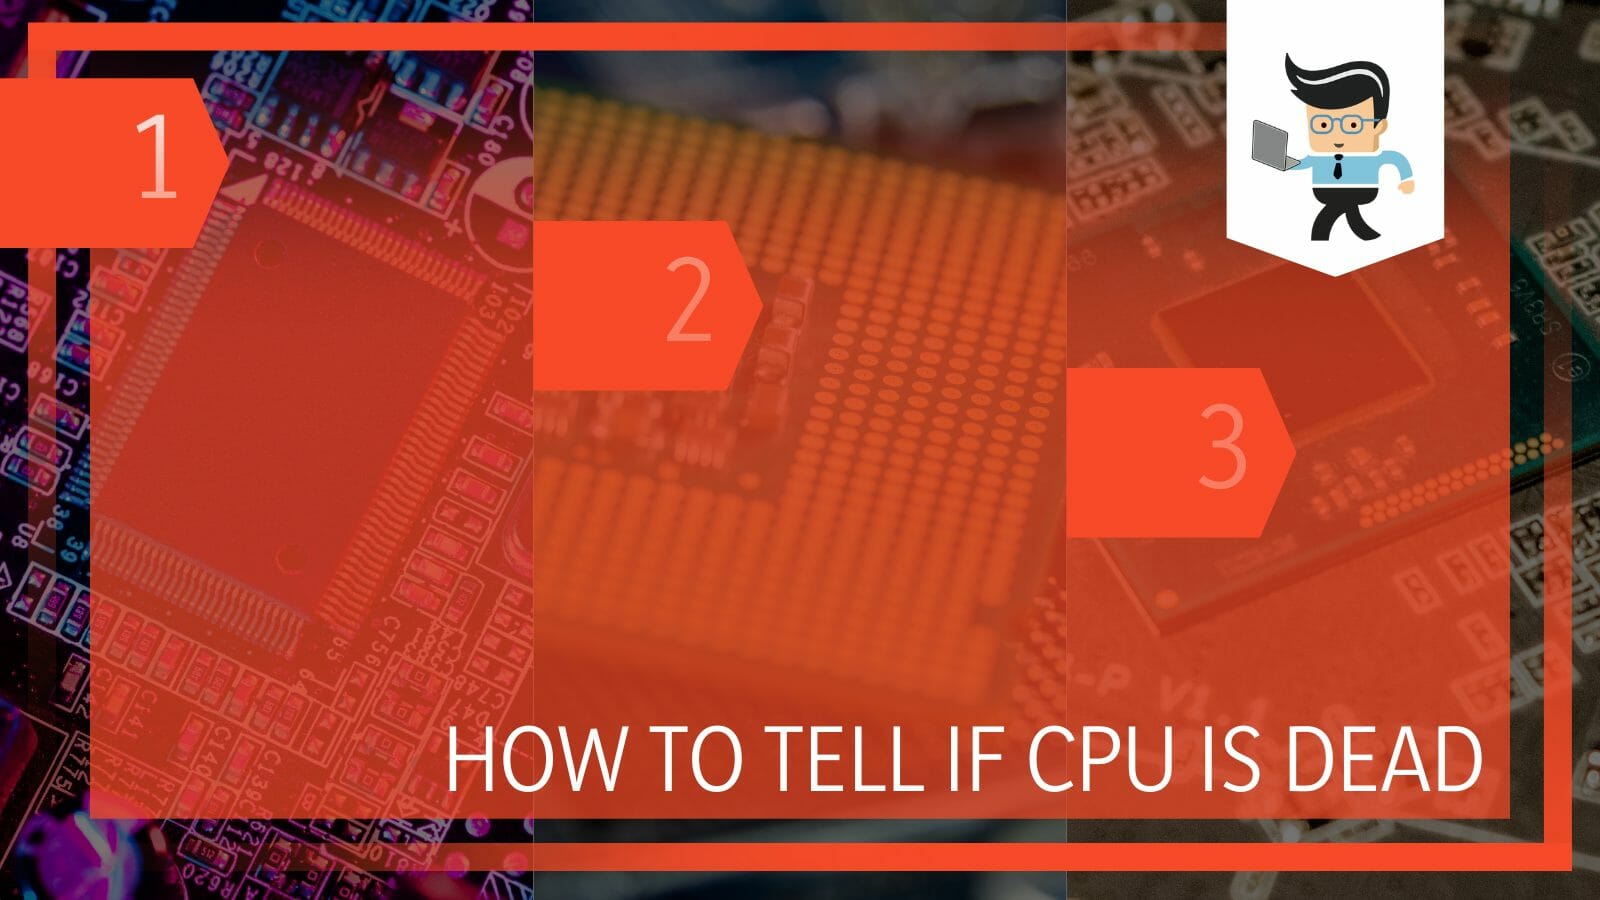 How To Tell If CPU Is Dead